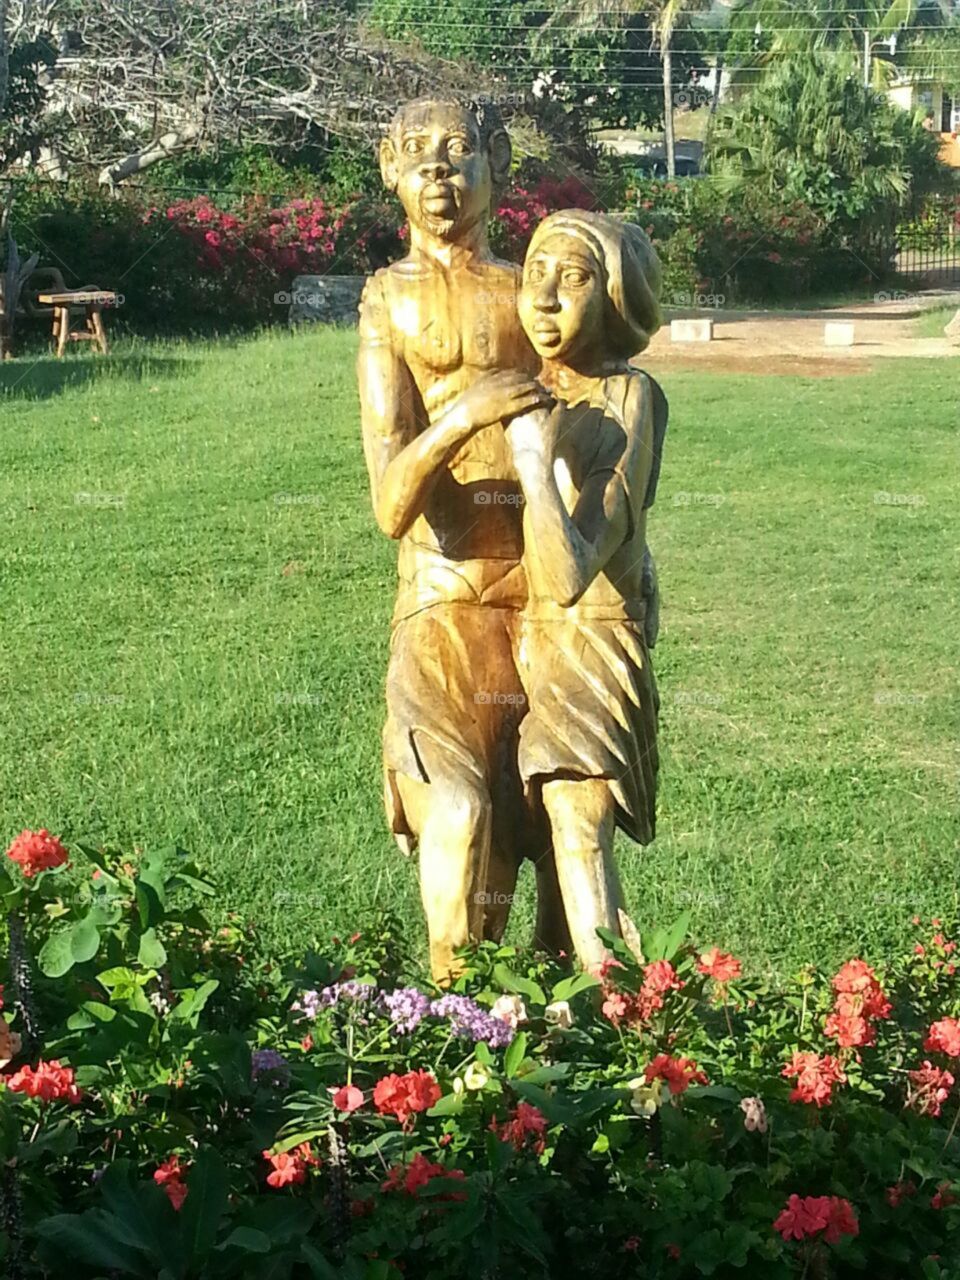 Lovers Leap. Statue of Lover Leap Couple in St. Elizabeth, Jamaica.